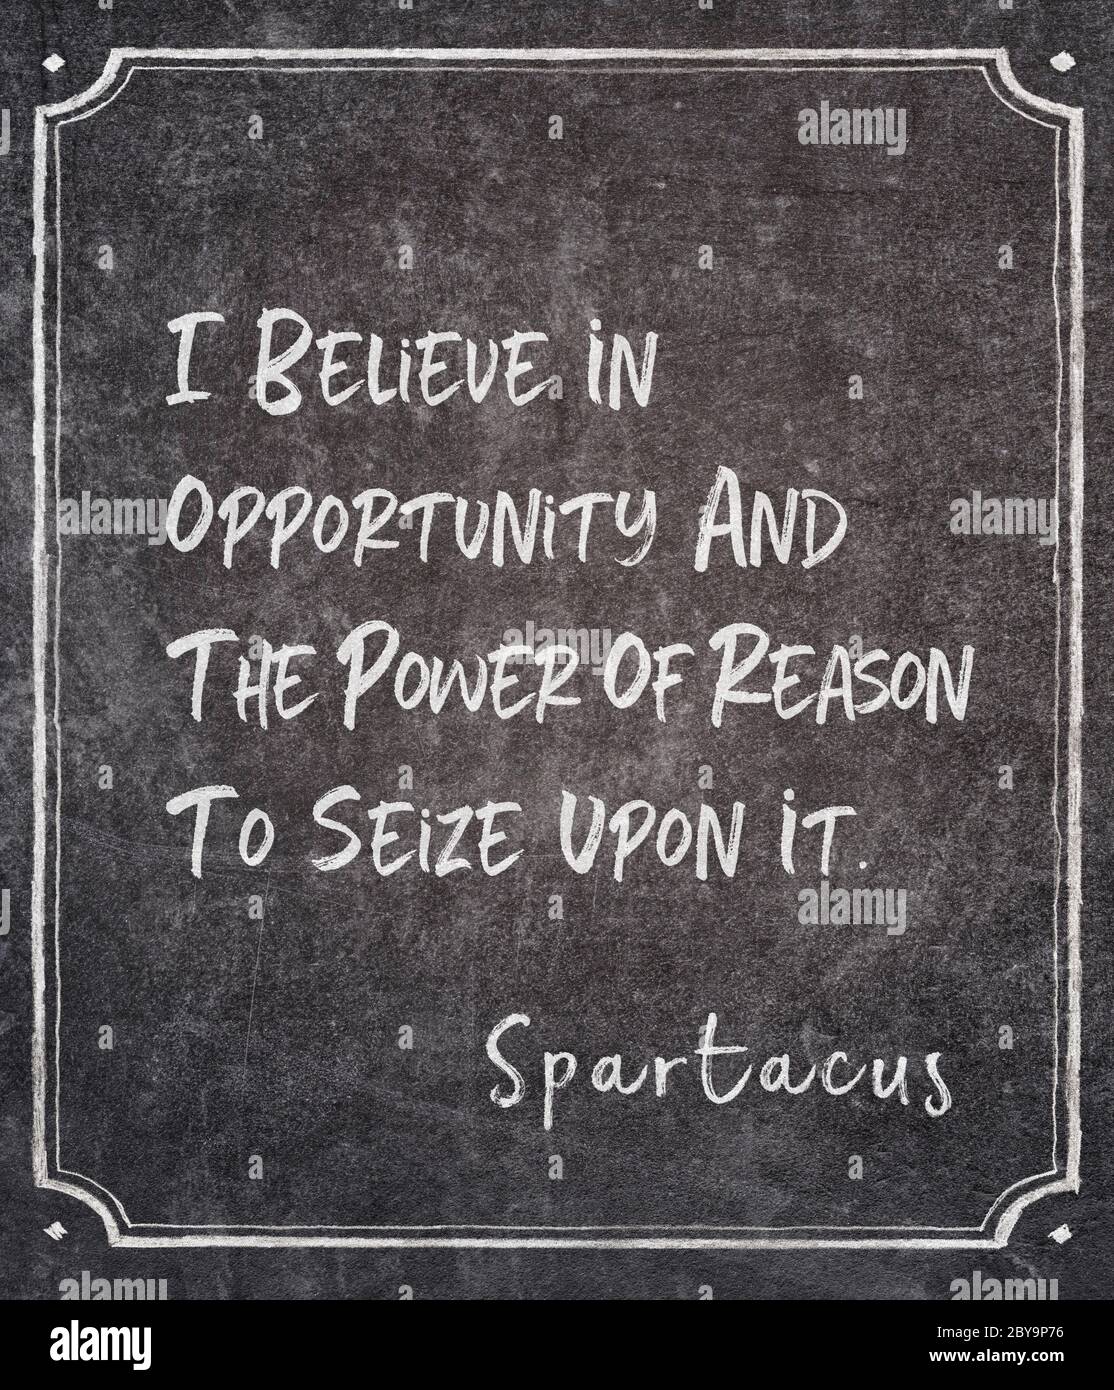 I believe in opportunity and the power of reason to seize upon it - ancient Roman gladiator and revolt leader Spartacus quote written on framed chalkb Stock Photo